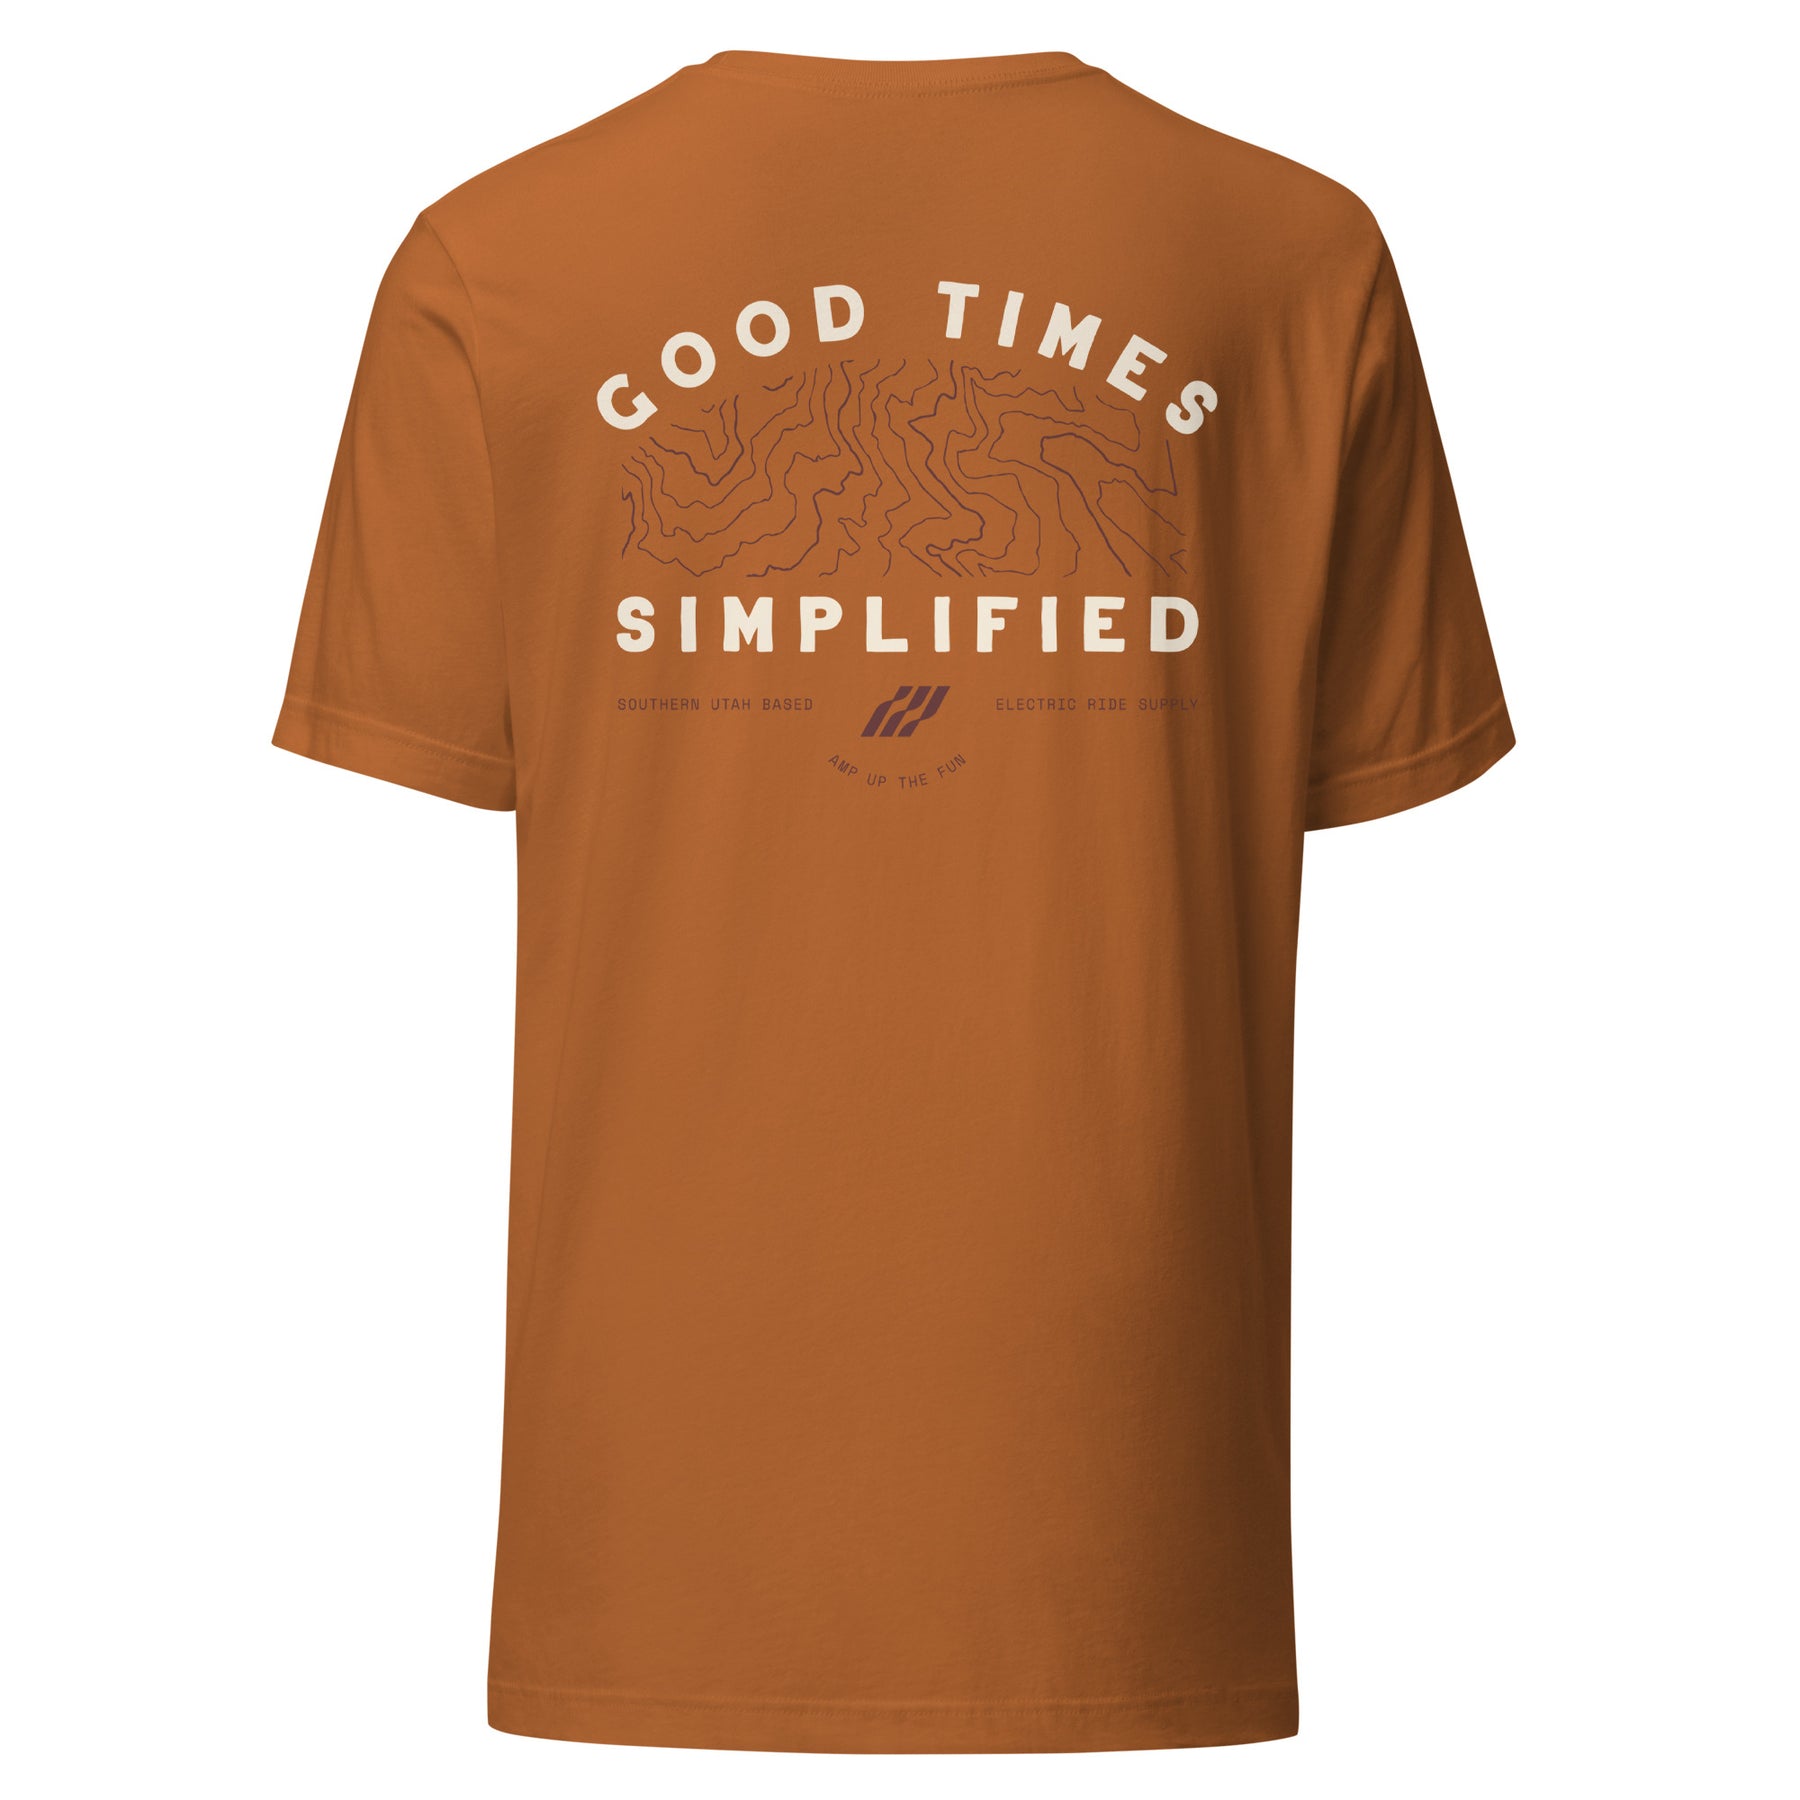 The Good Times Simplified Tee 1 Apparel Toast XS 